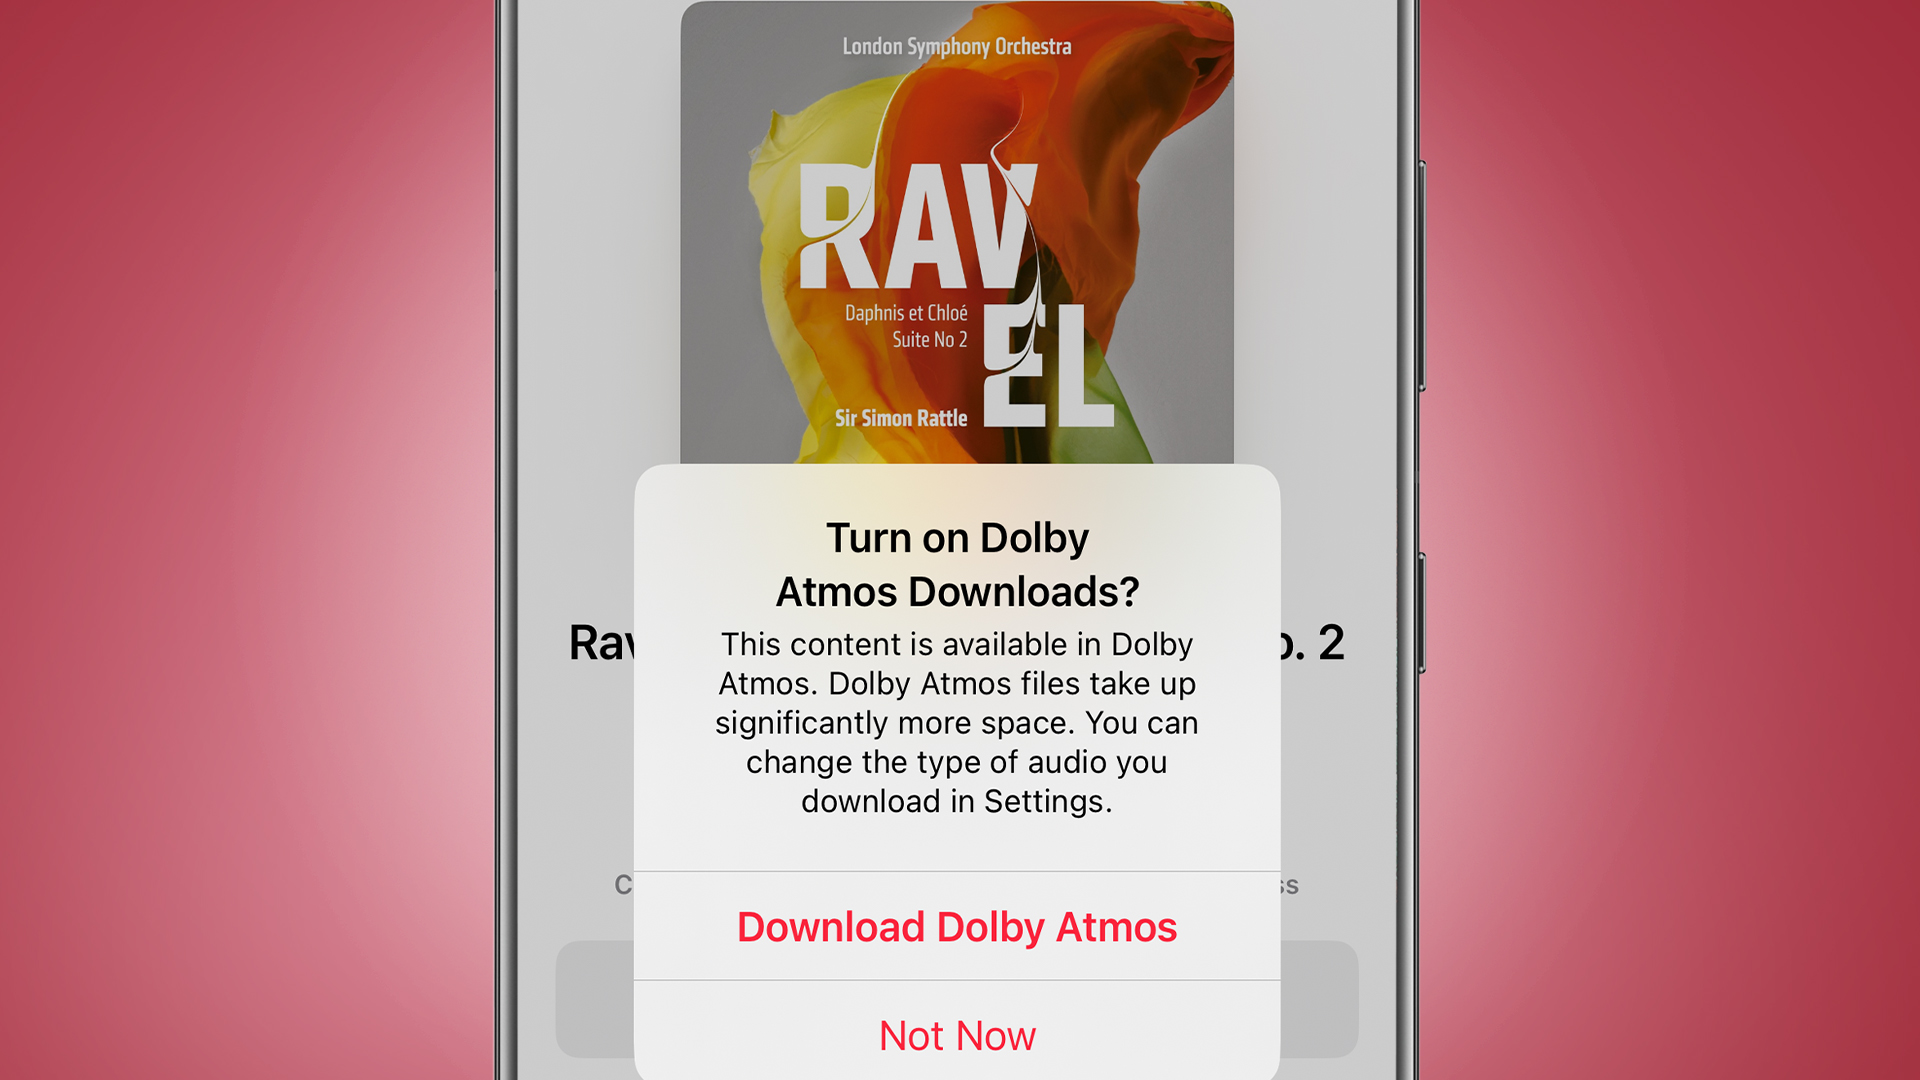 An iPhone on a red background showing the Apple Music Classical app